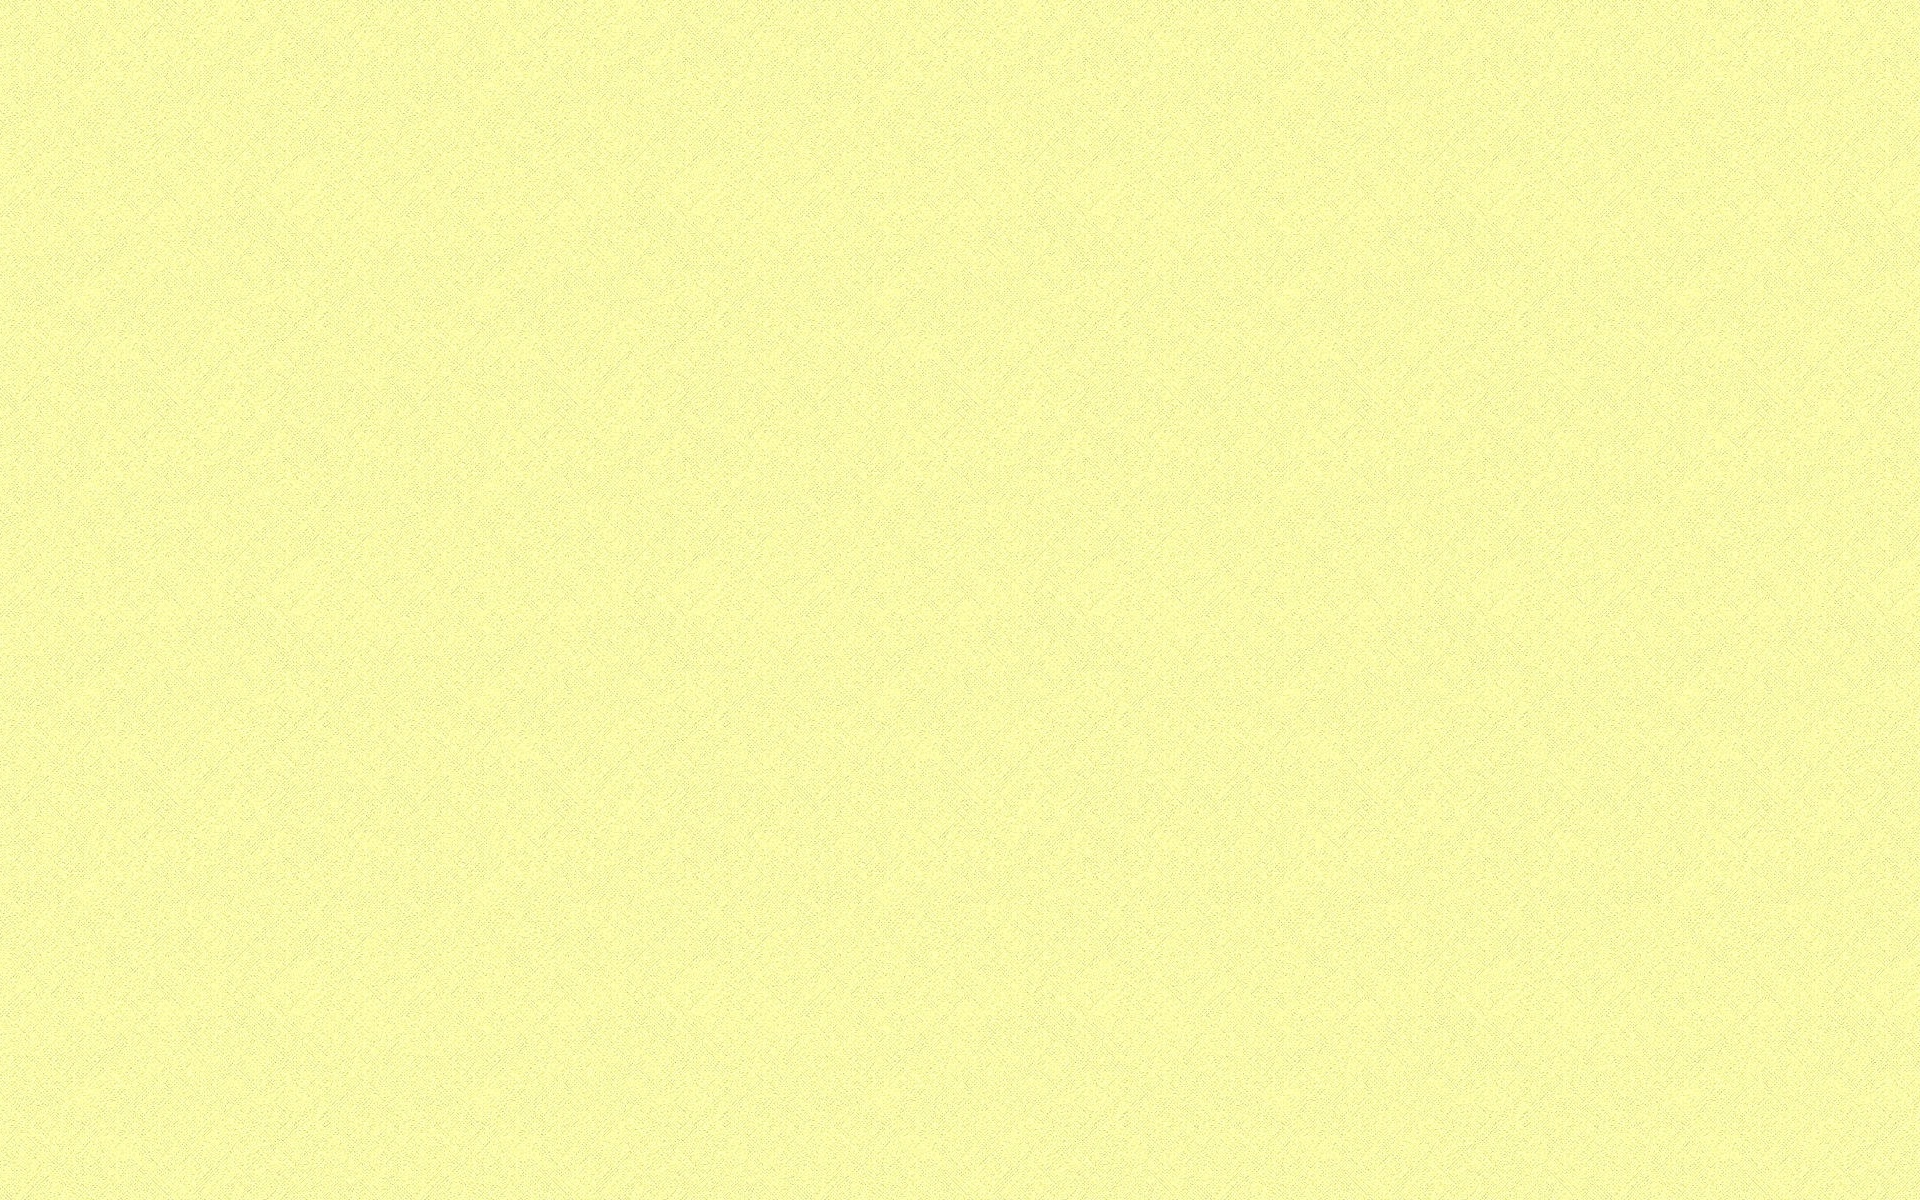 Pale Yellow Background Guide For School